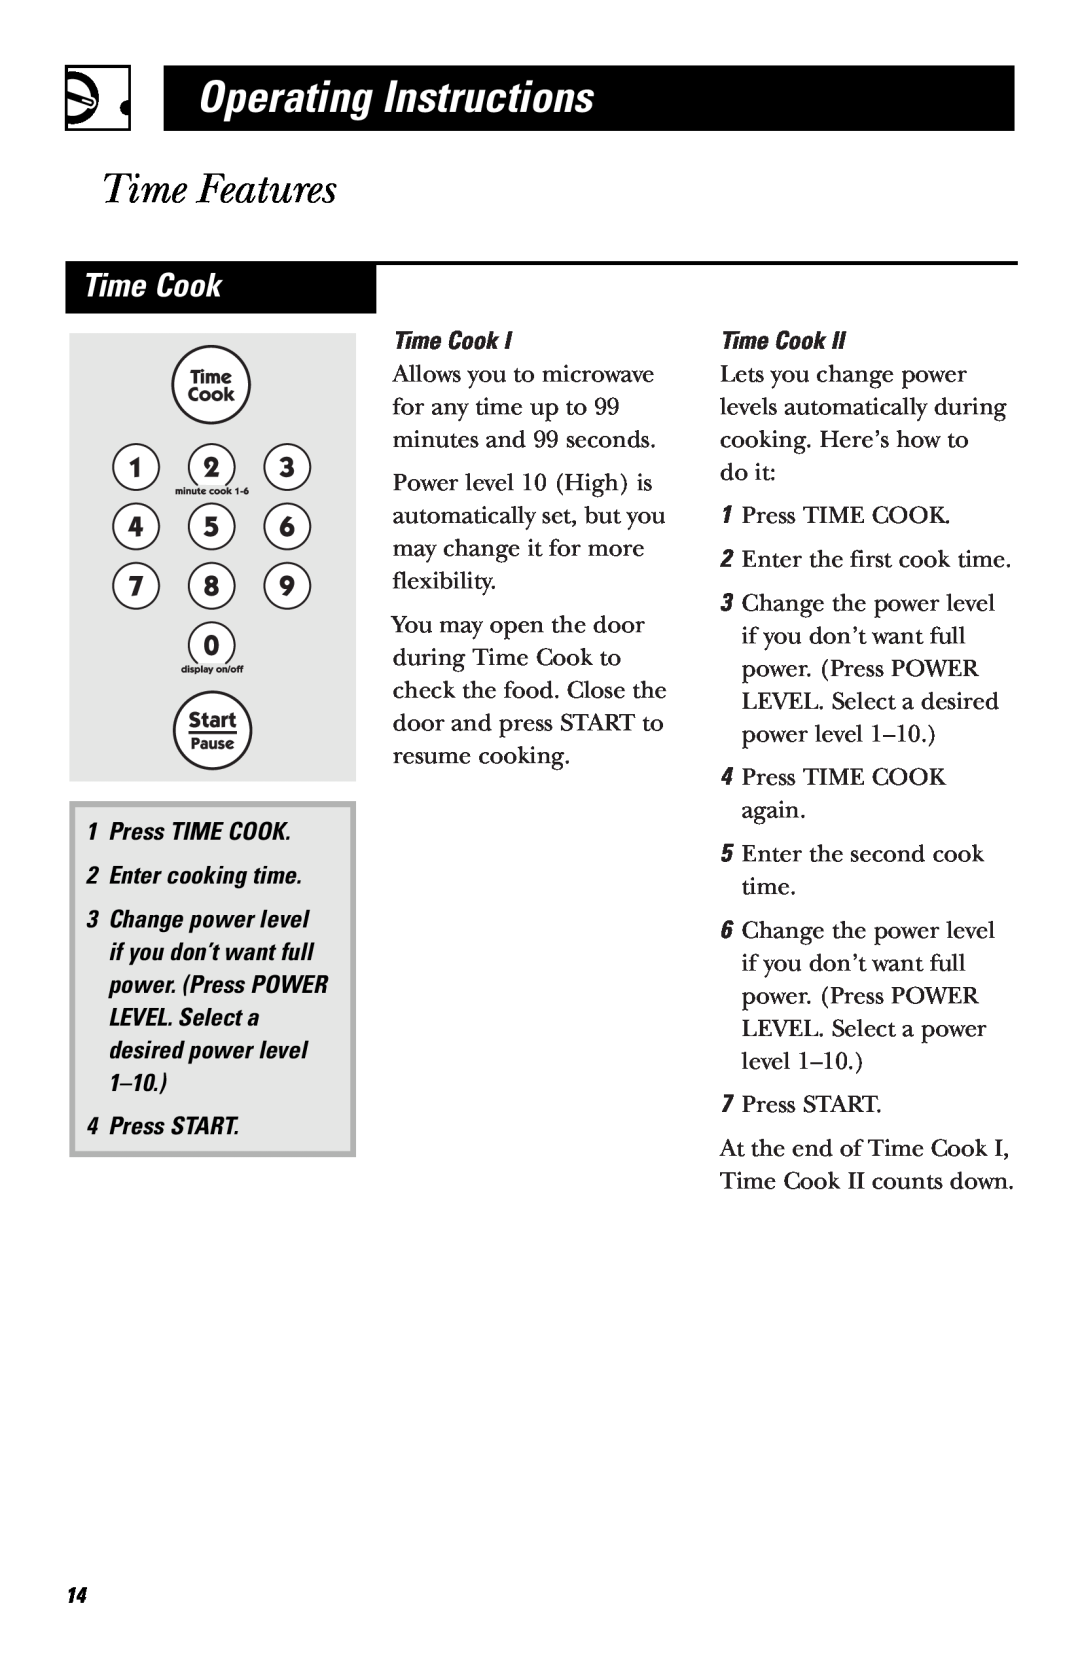 Hotpoint RVM1635 Time Features, Time Cook, Operating Instructions, Press TIME COOK 2 Enter cooking time, Press START 